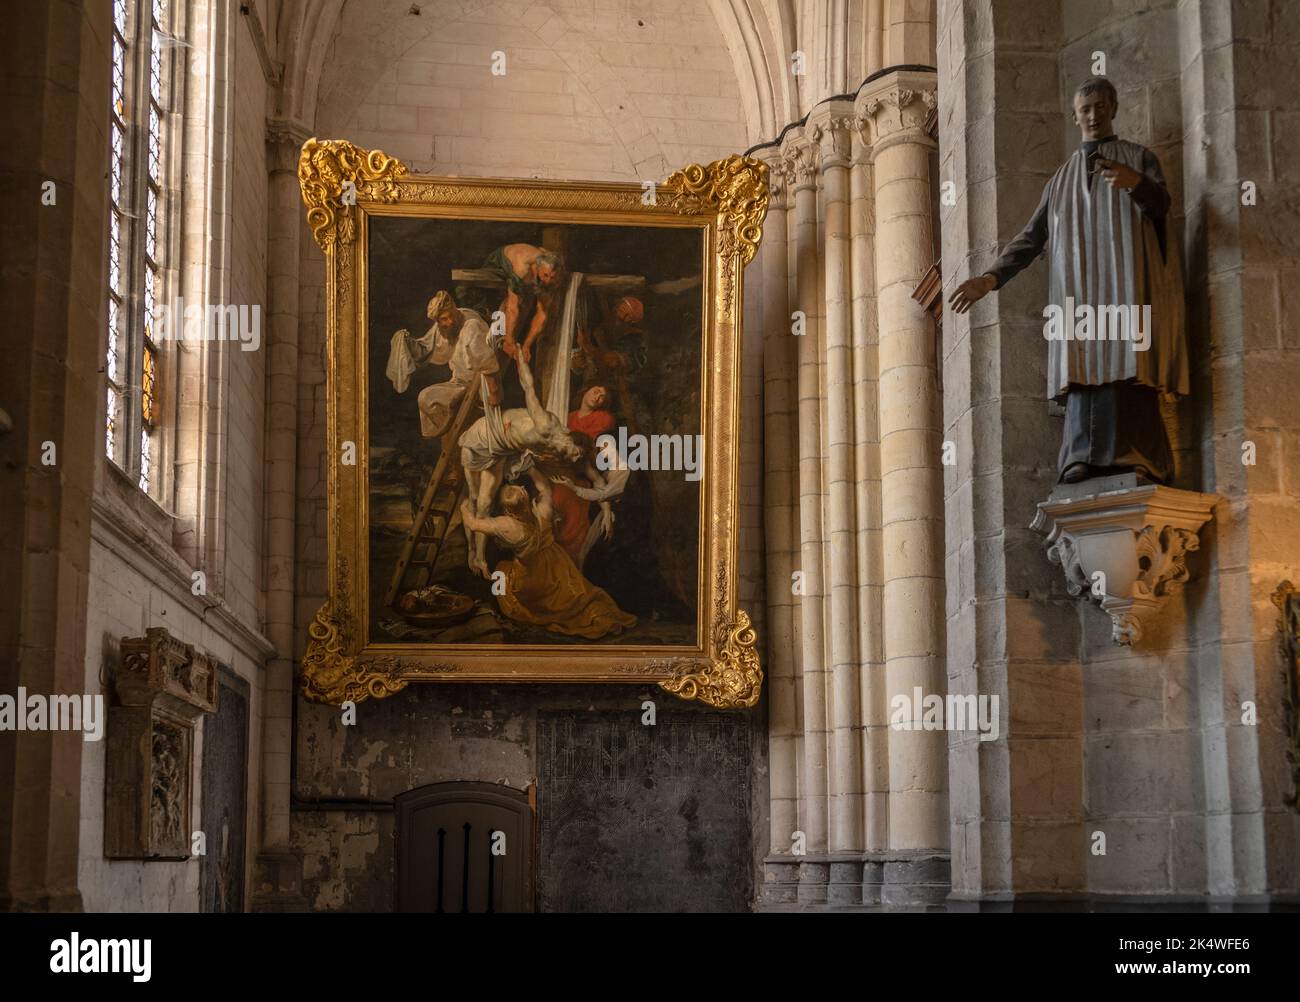 Saint-Omer Cathedral Pas de Calais France September 2022 Painting of the Descent from the Cross by Peter Paul Rubens at Saint-Omer Cathedral, 1616 Sai Stock Photo